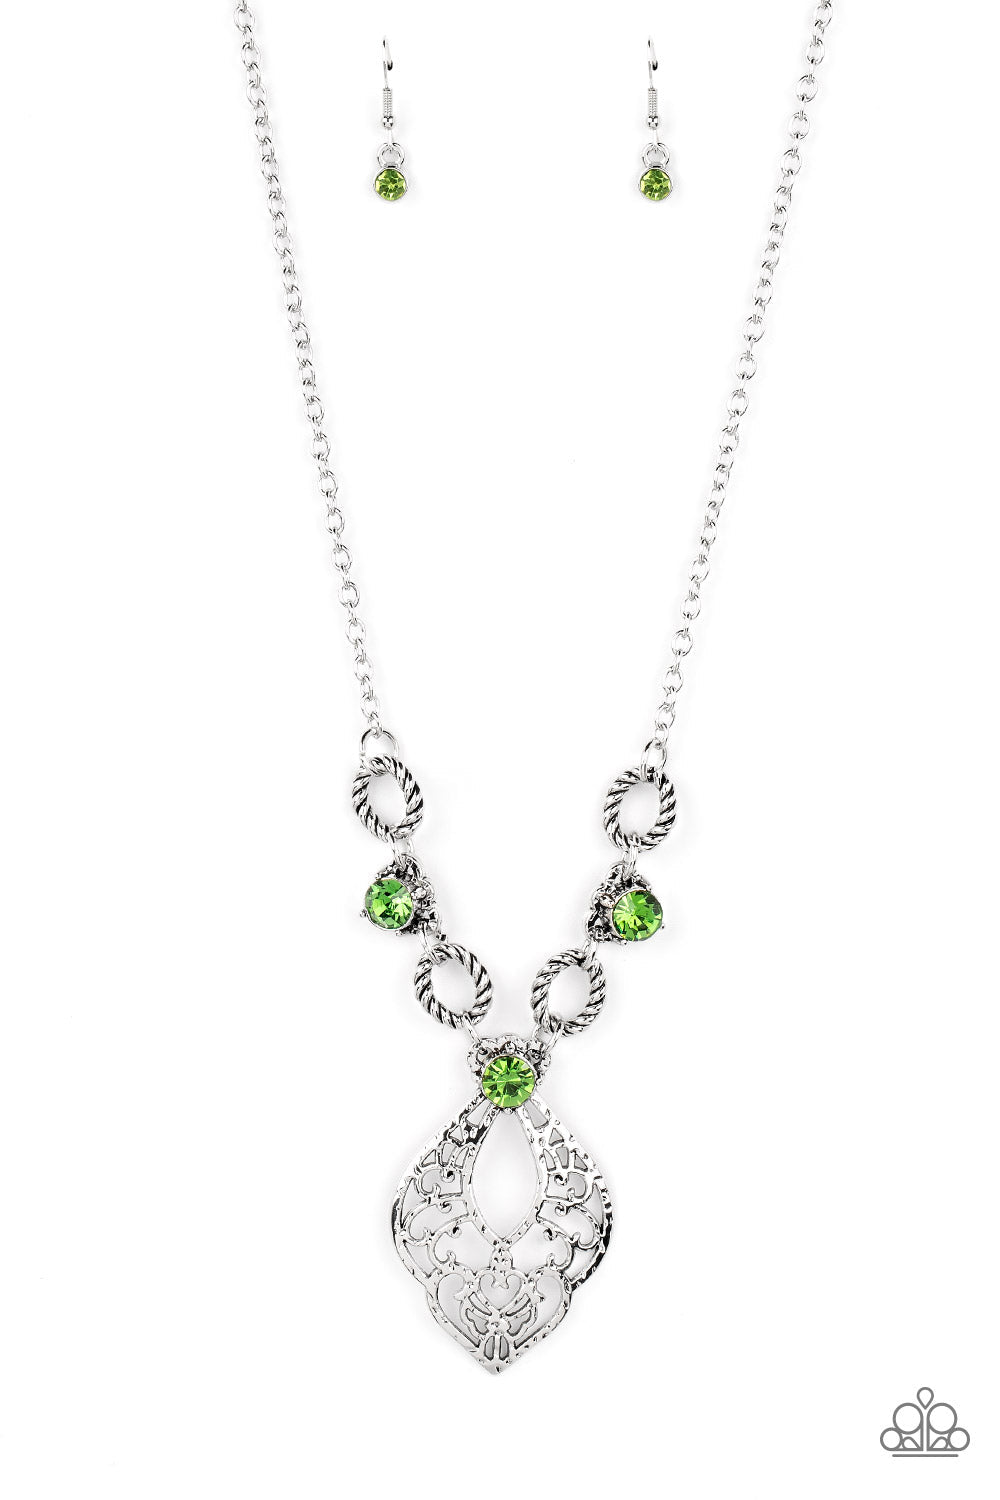 Contemporary Connections - Green Oversized Rhinestones/Hammered Silver Filigree Pendant Paparazzi Necklace & matching earrings